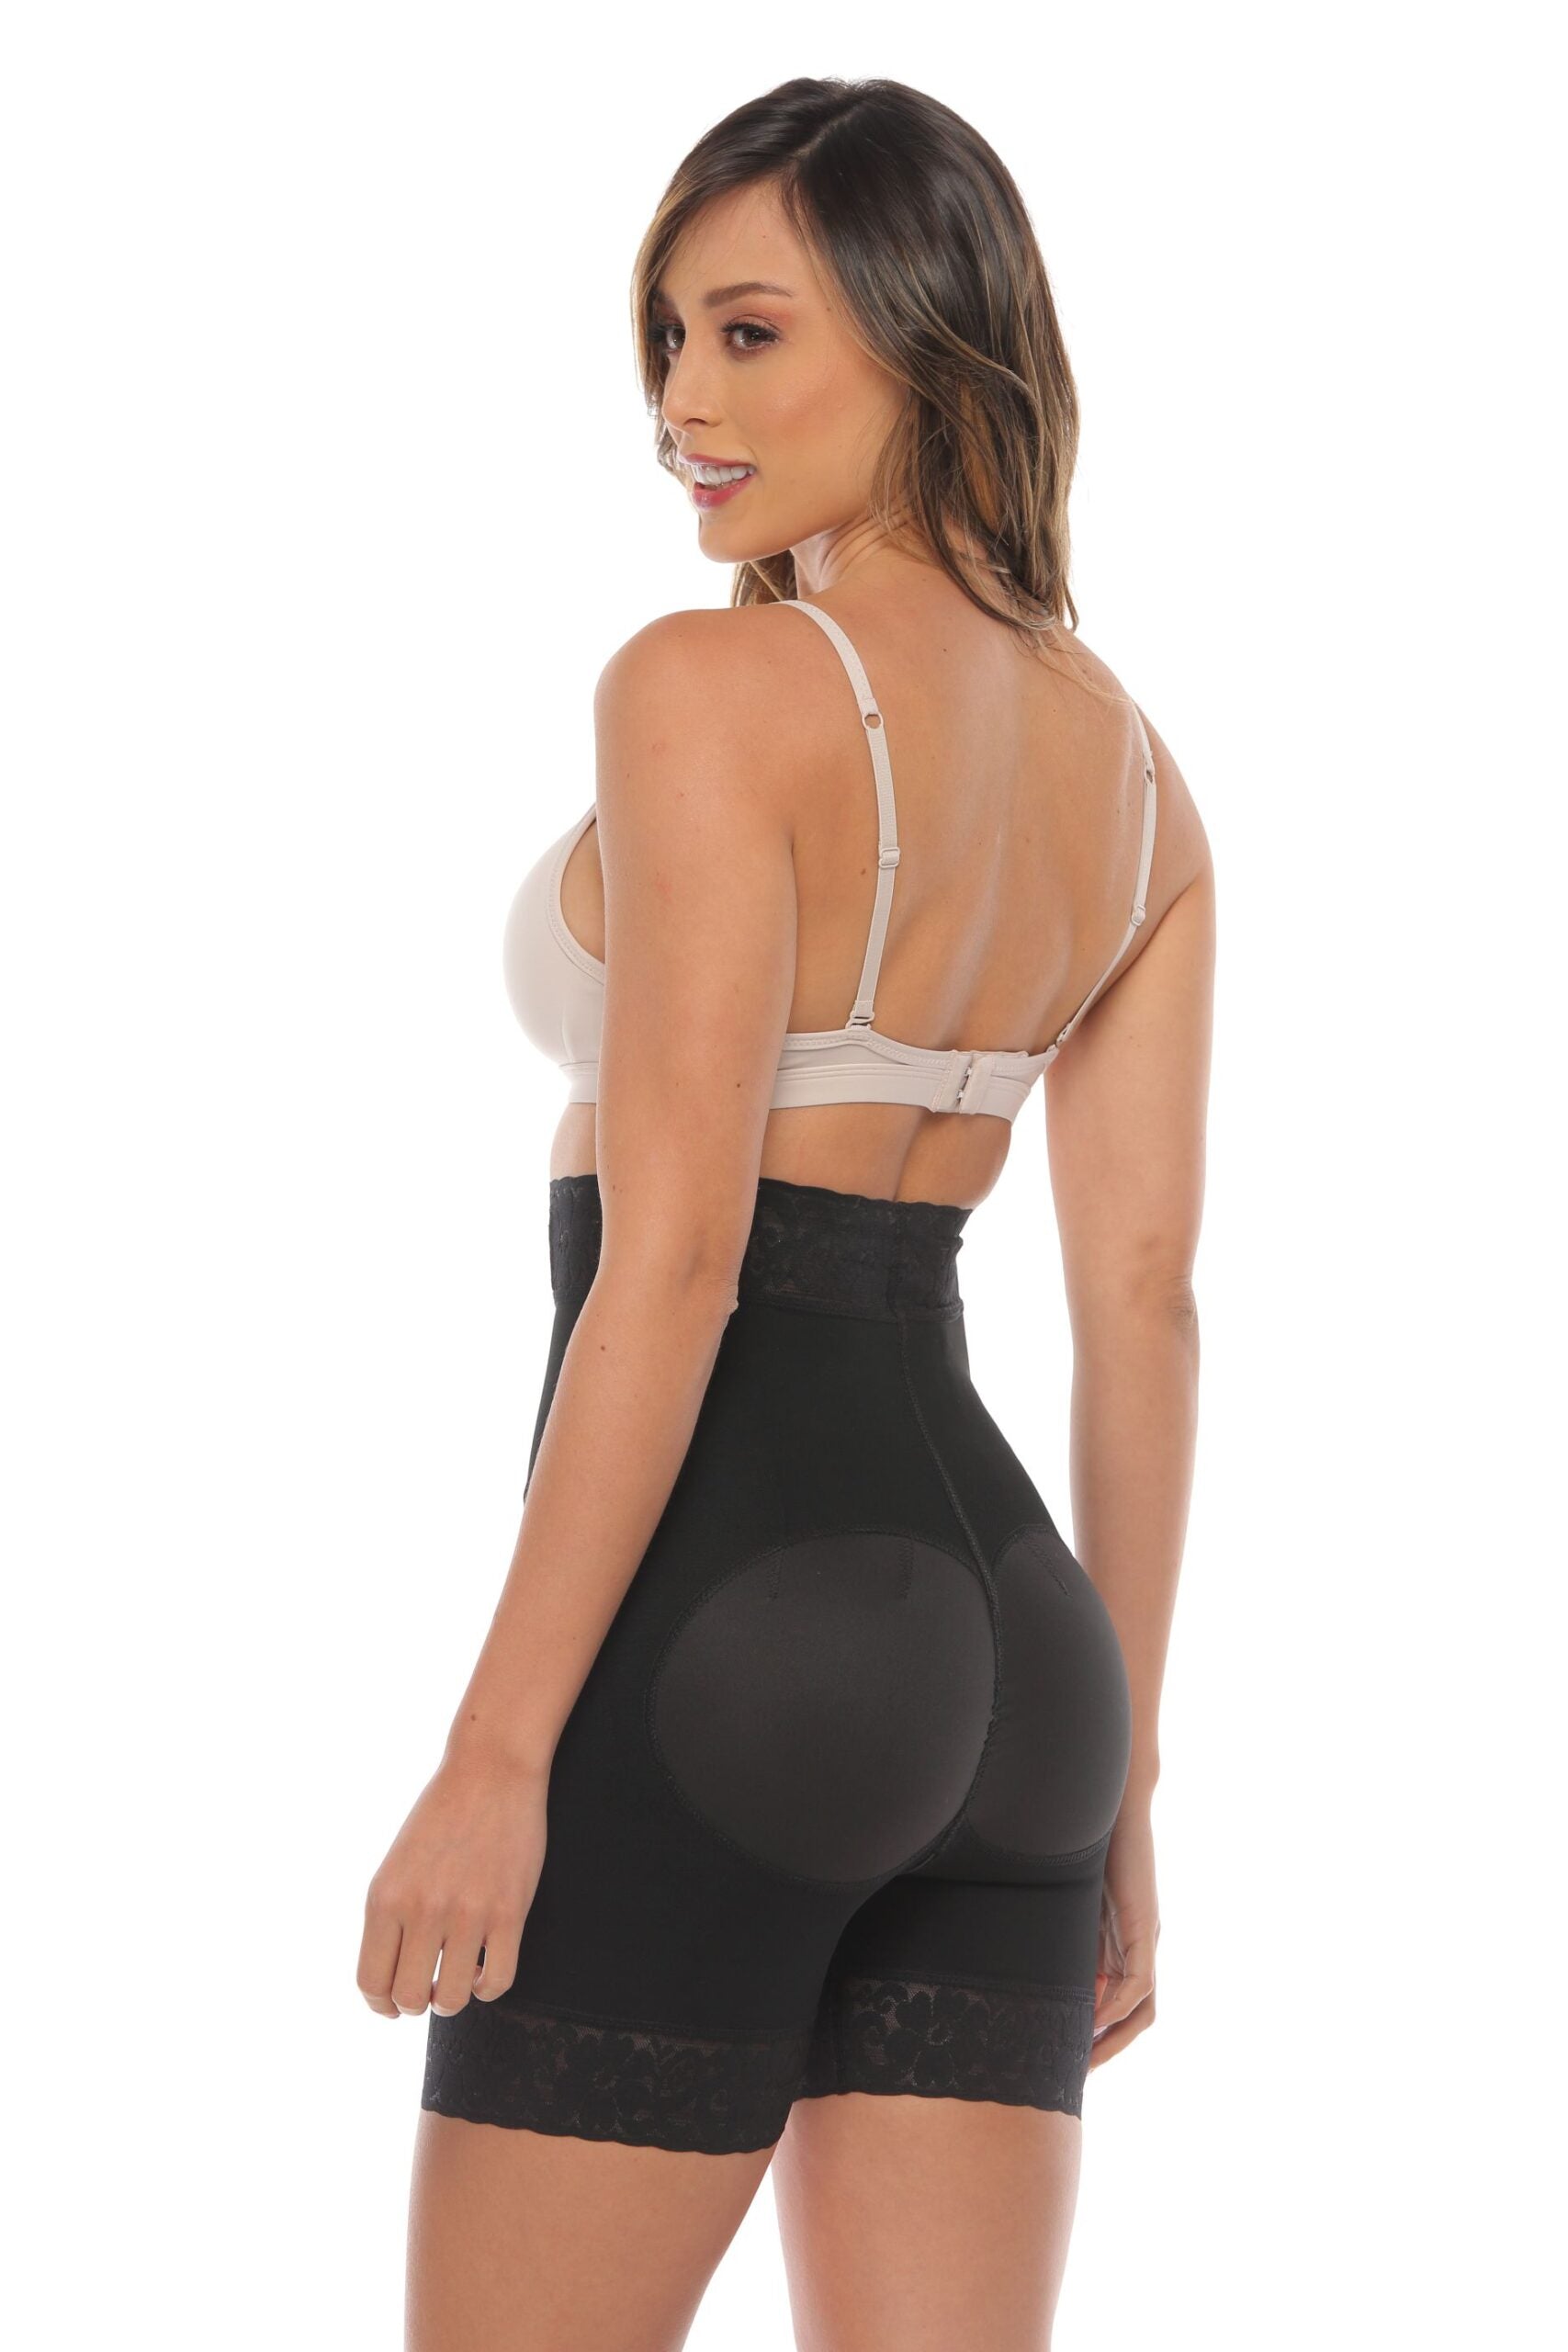 Buy Fajas Colombianas Calzones Levanta Cola Pompis High Waisted